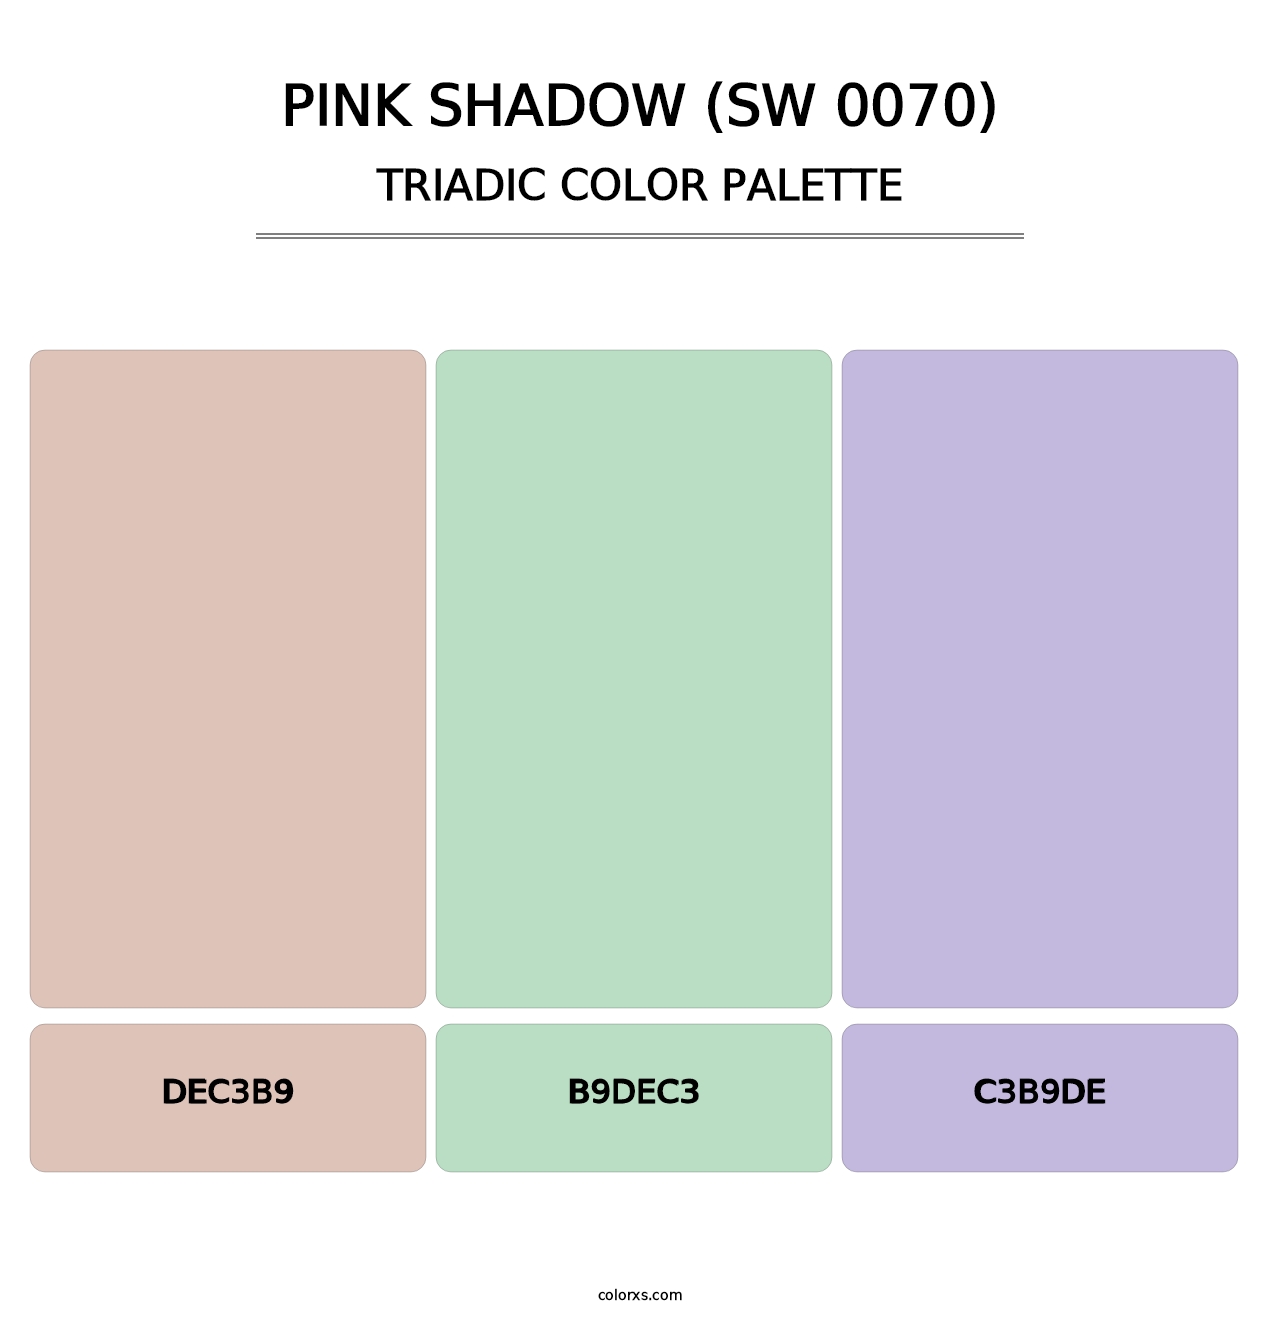 Pink Shadow (SW 0070) - Triadic Color Palette